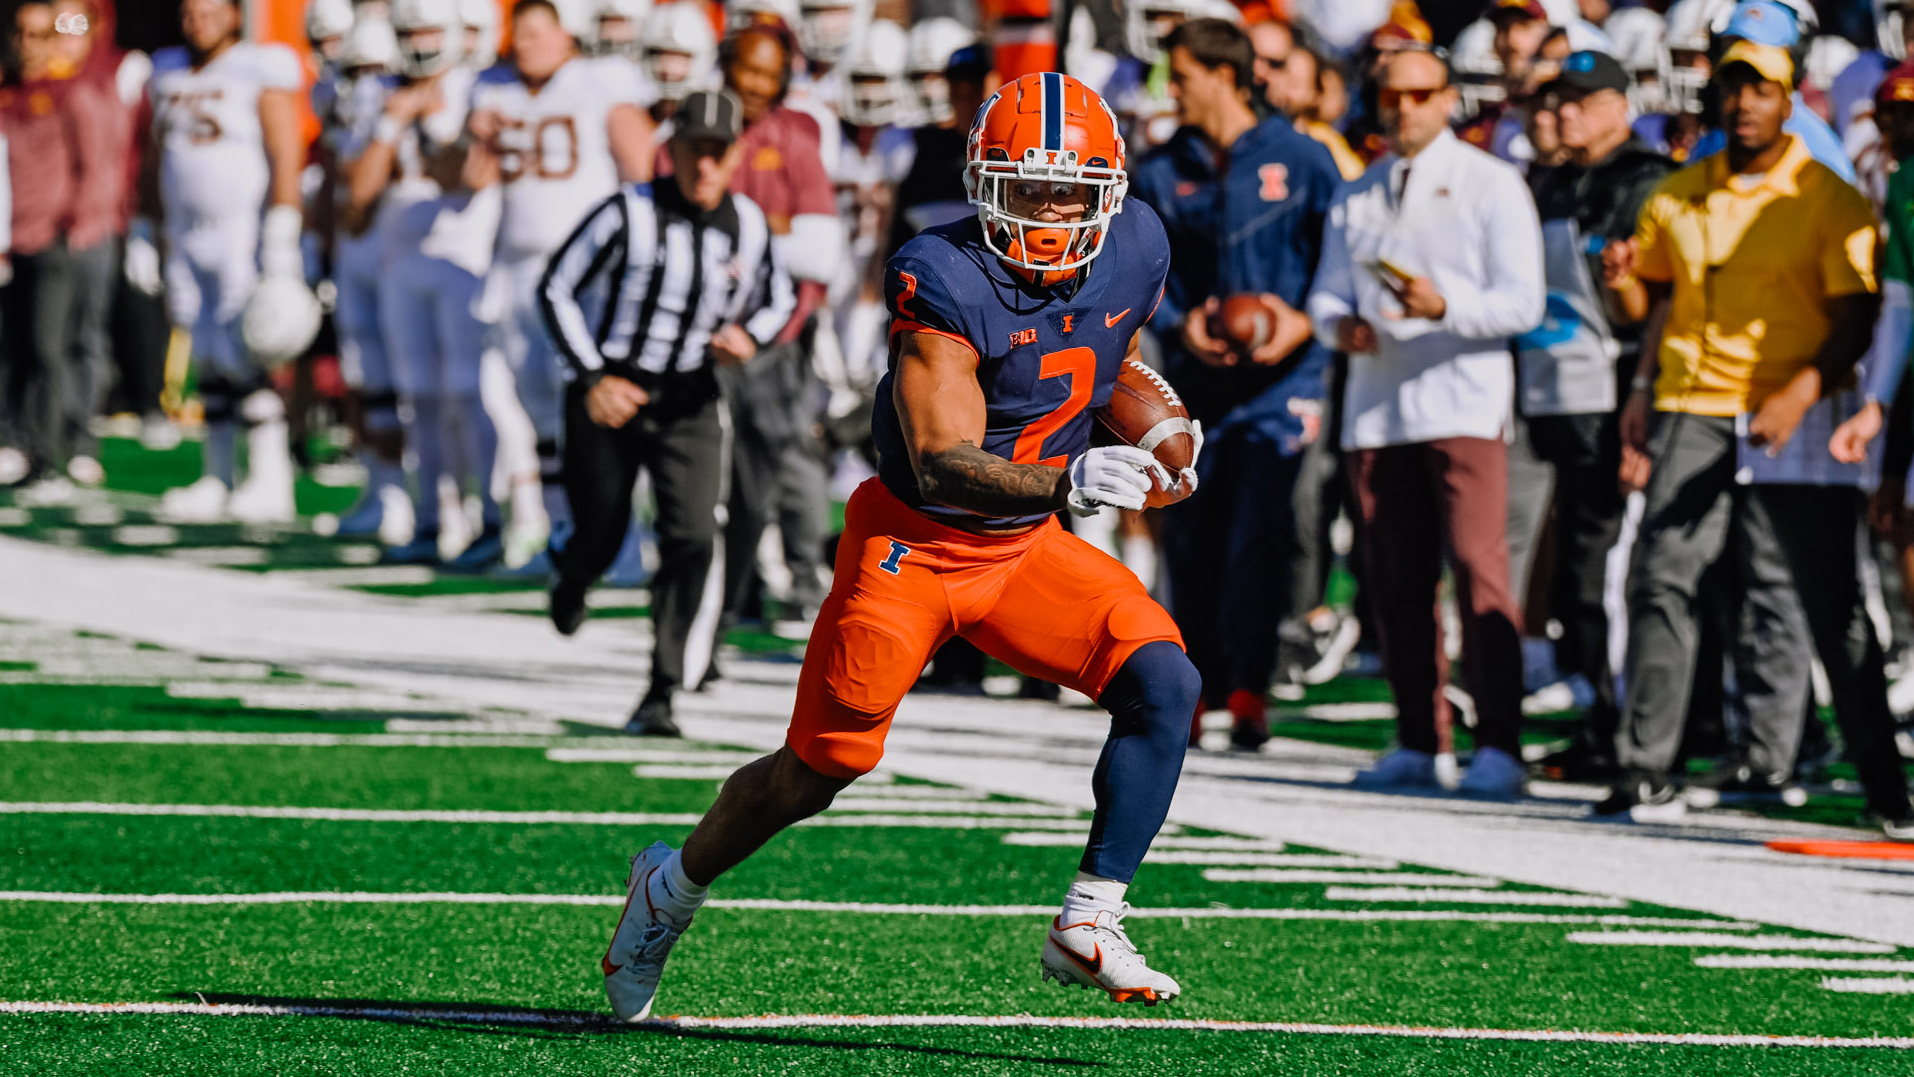 Illinois' Brown Named Big Ten, Rose Bowl Player of the Week